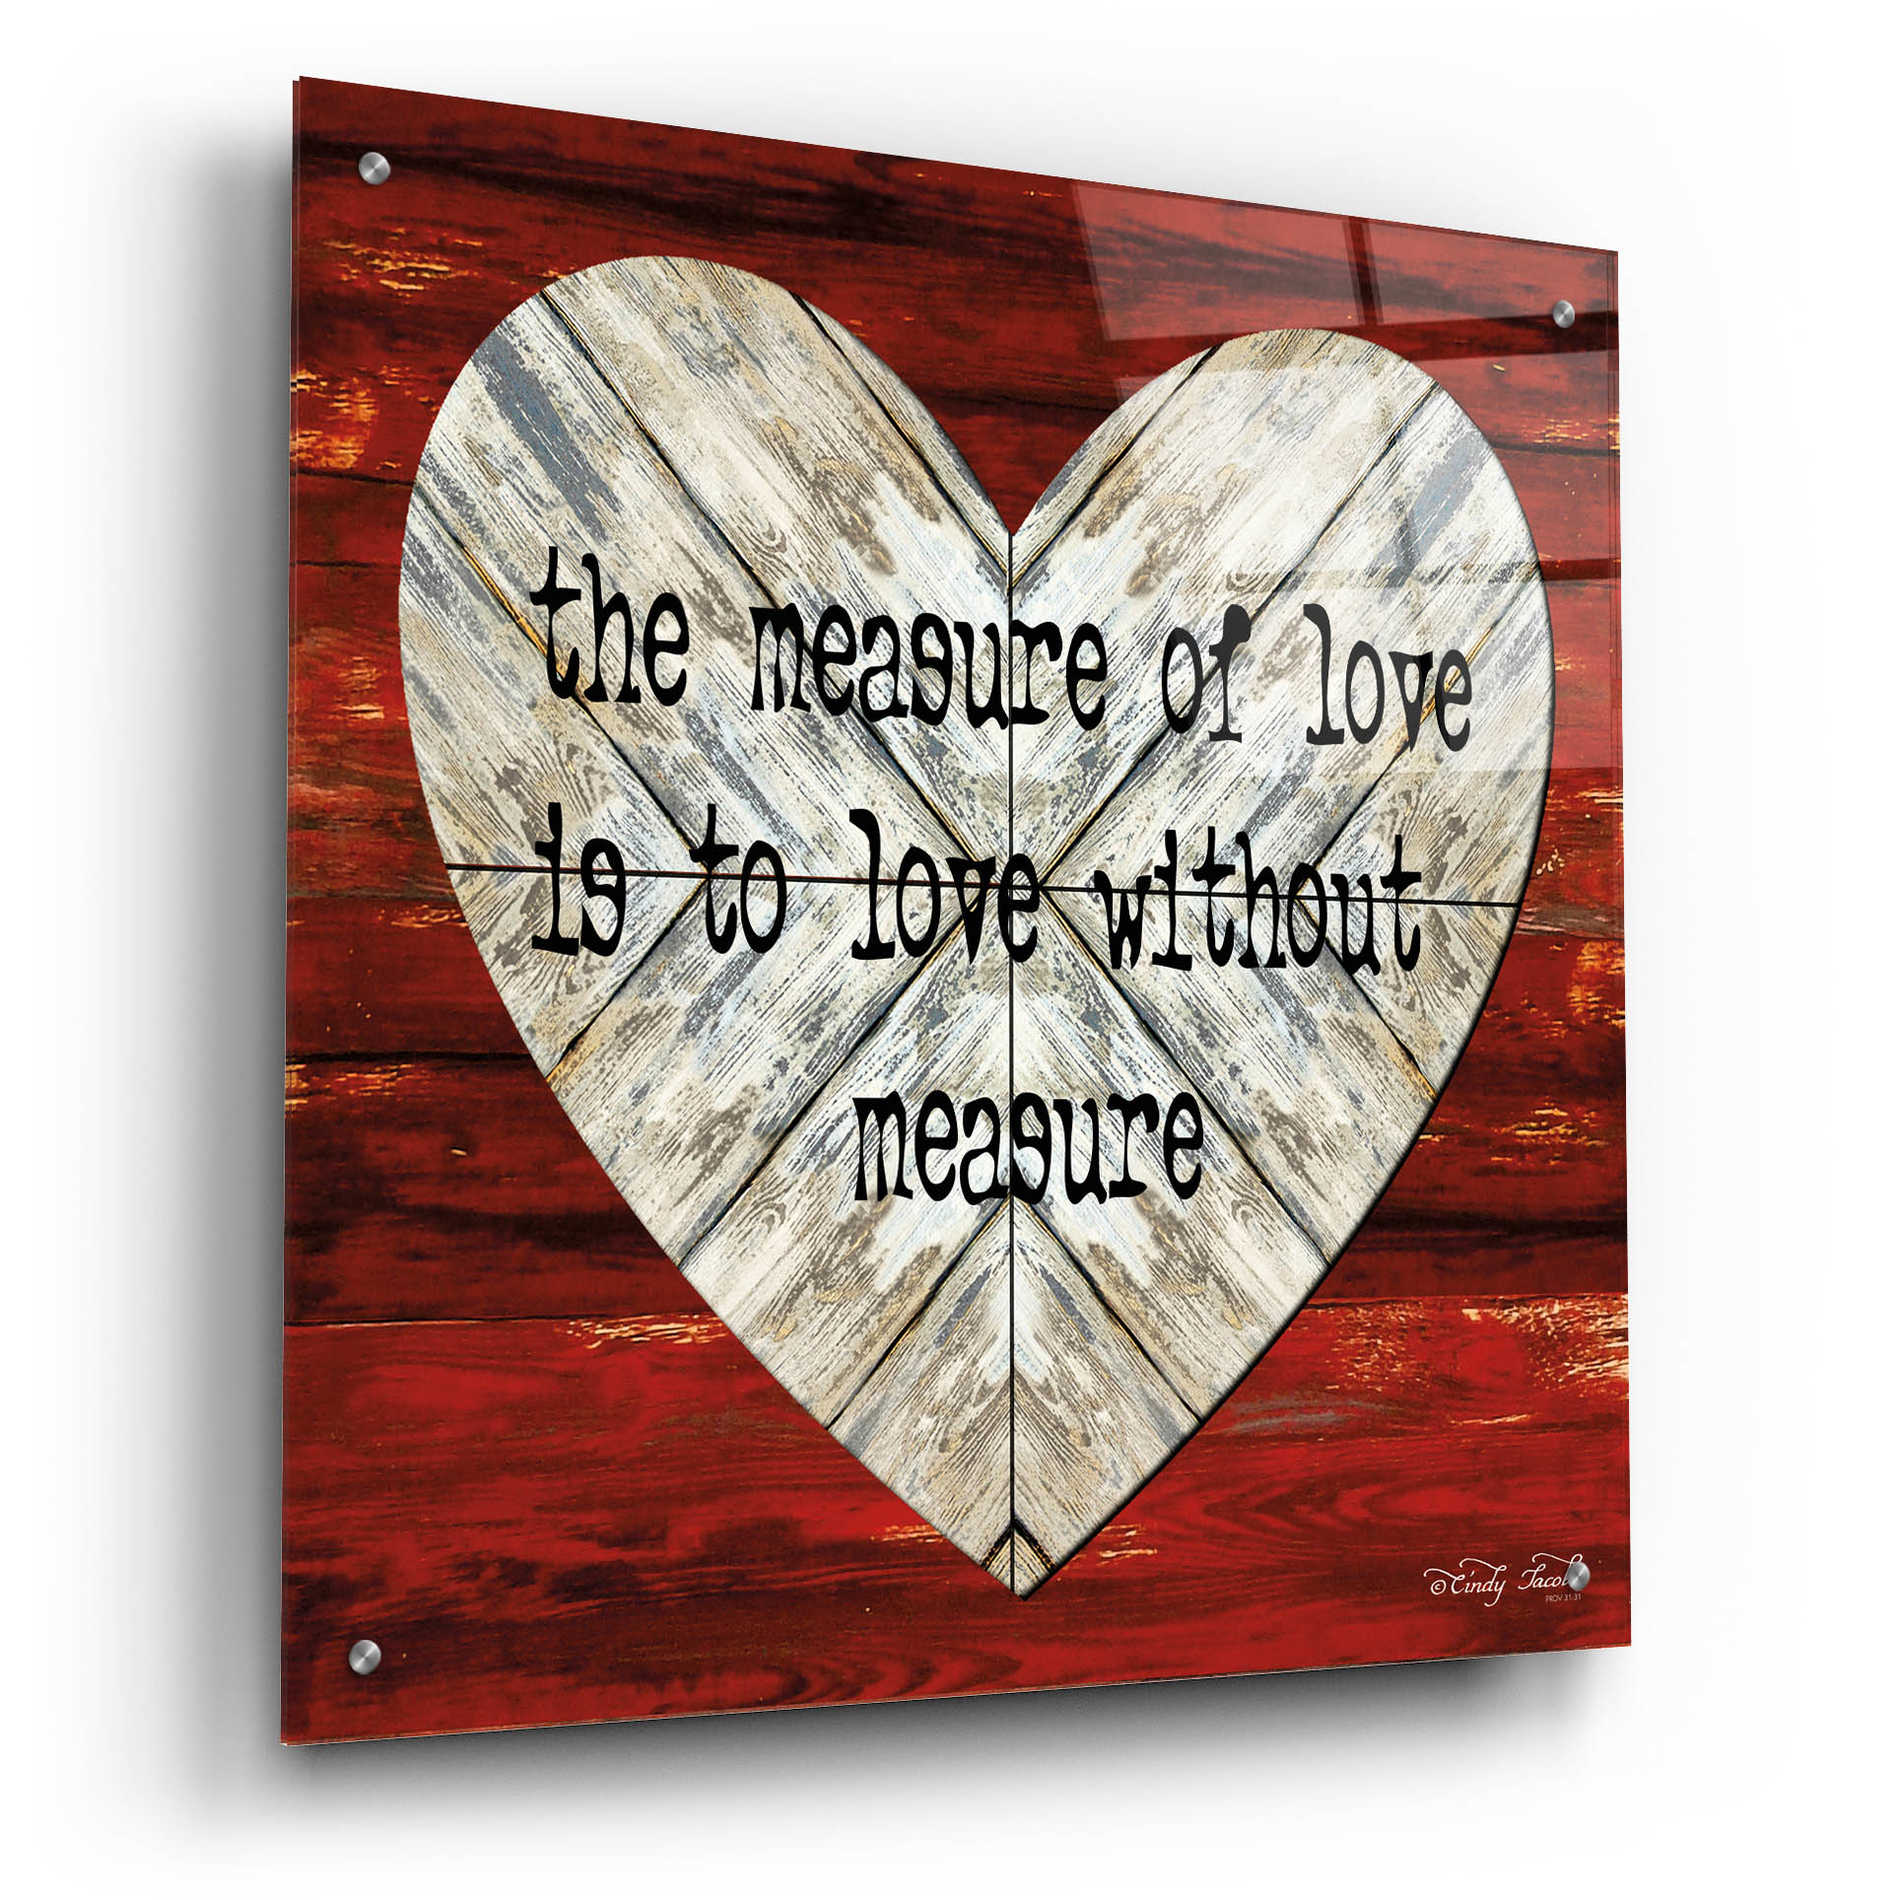 Epic Art 'The Measure of Love' by Cindy Jacobs, Acrylic Glass Wall Art,24x24